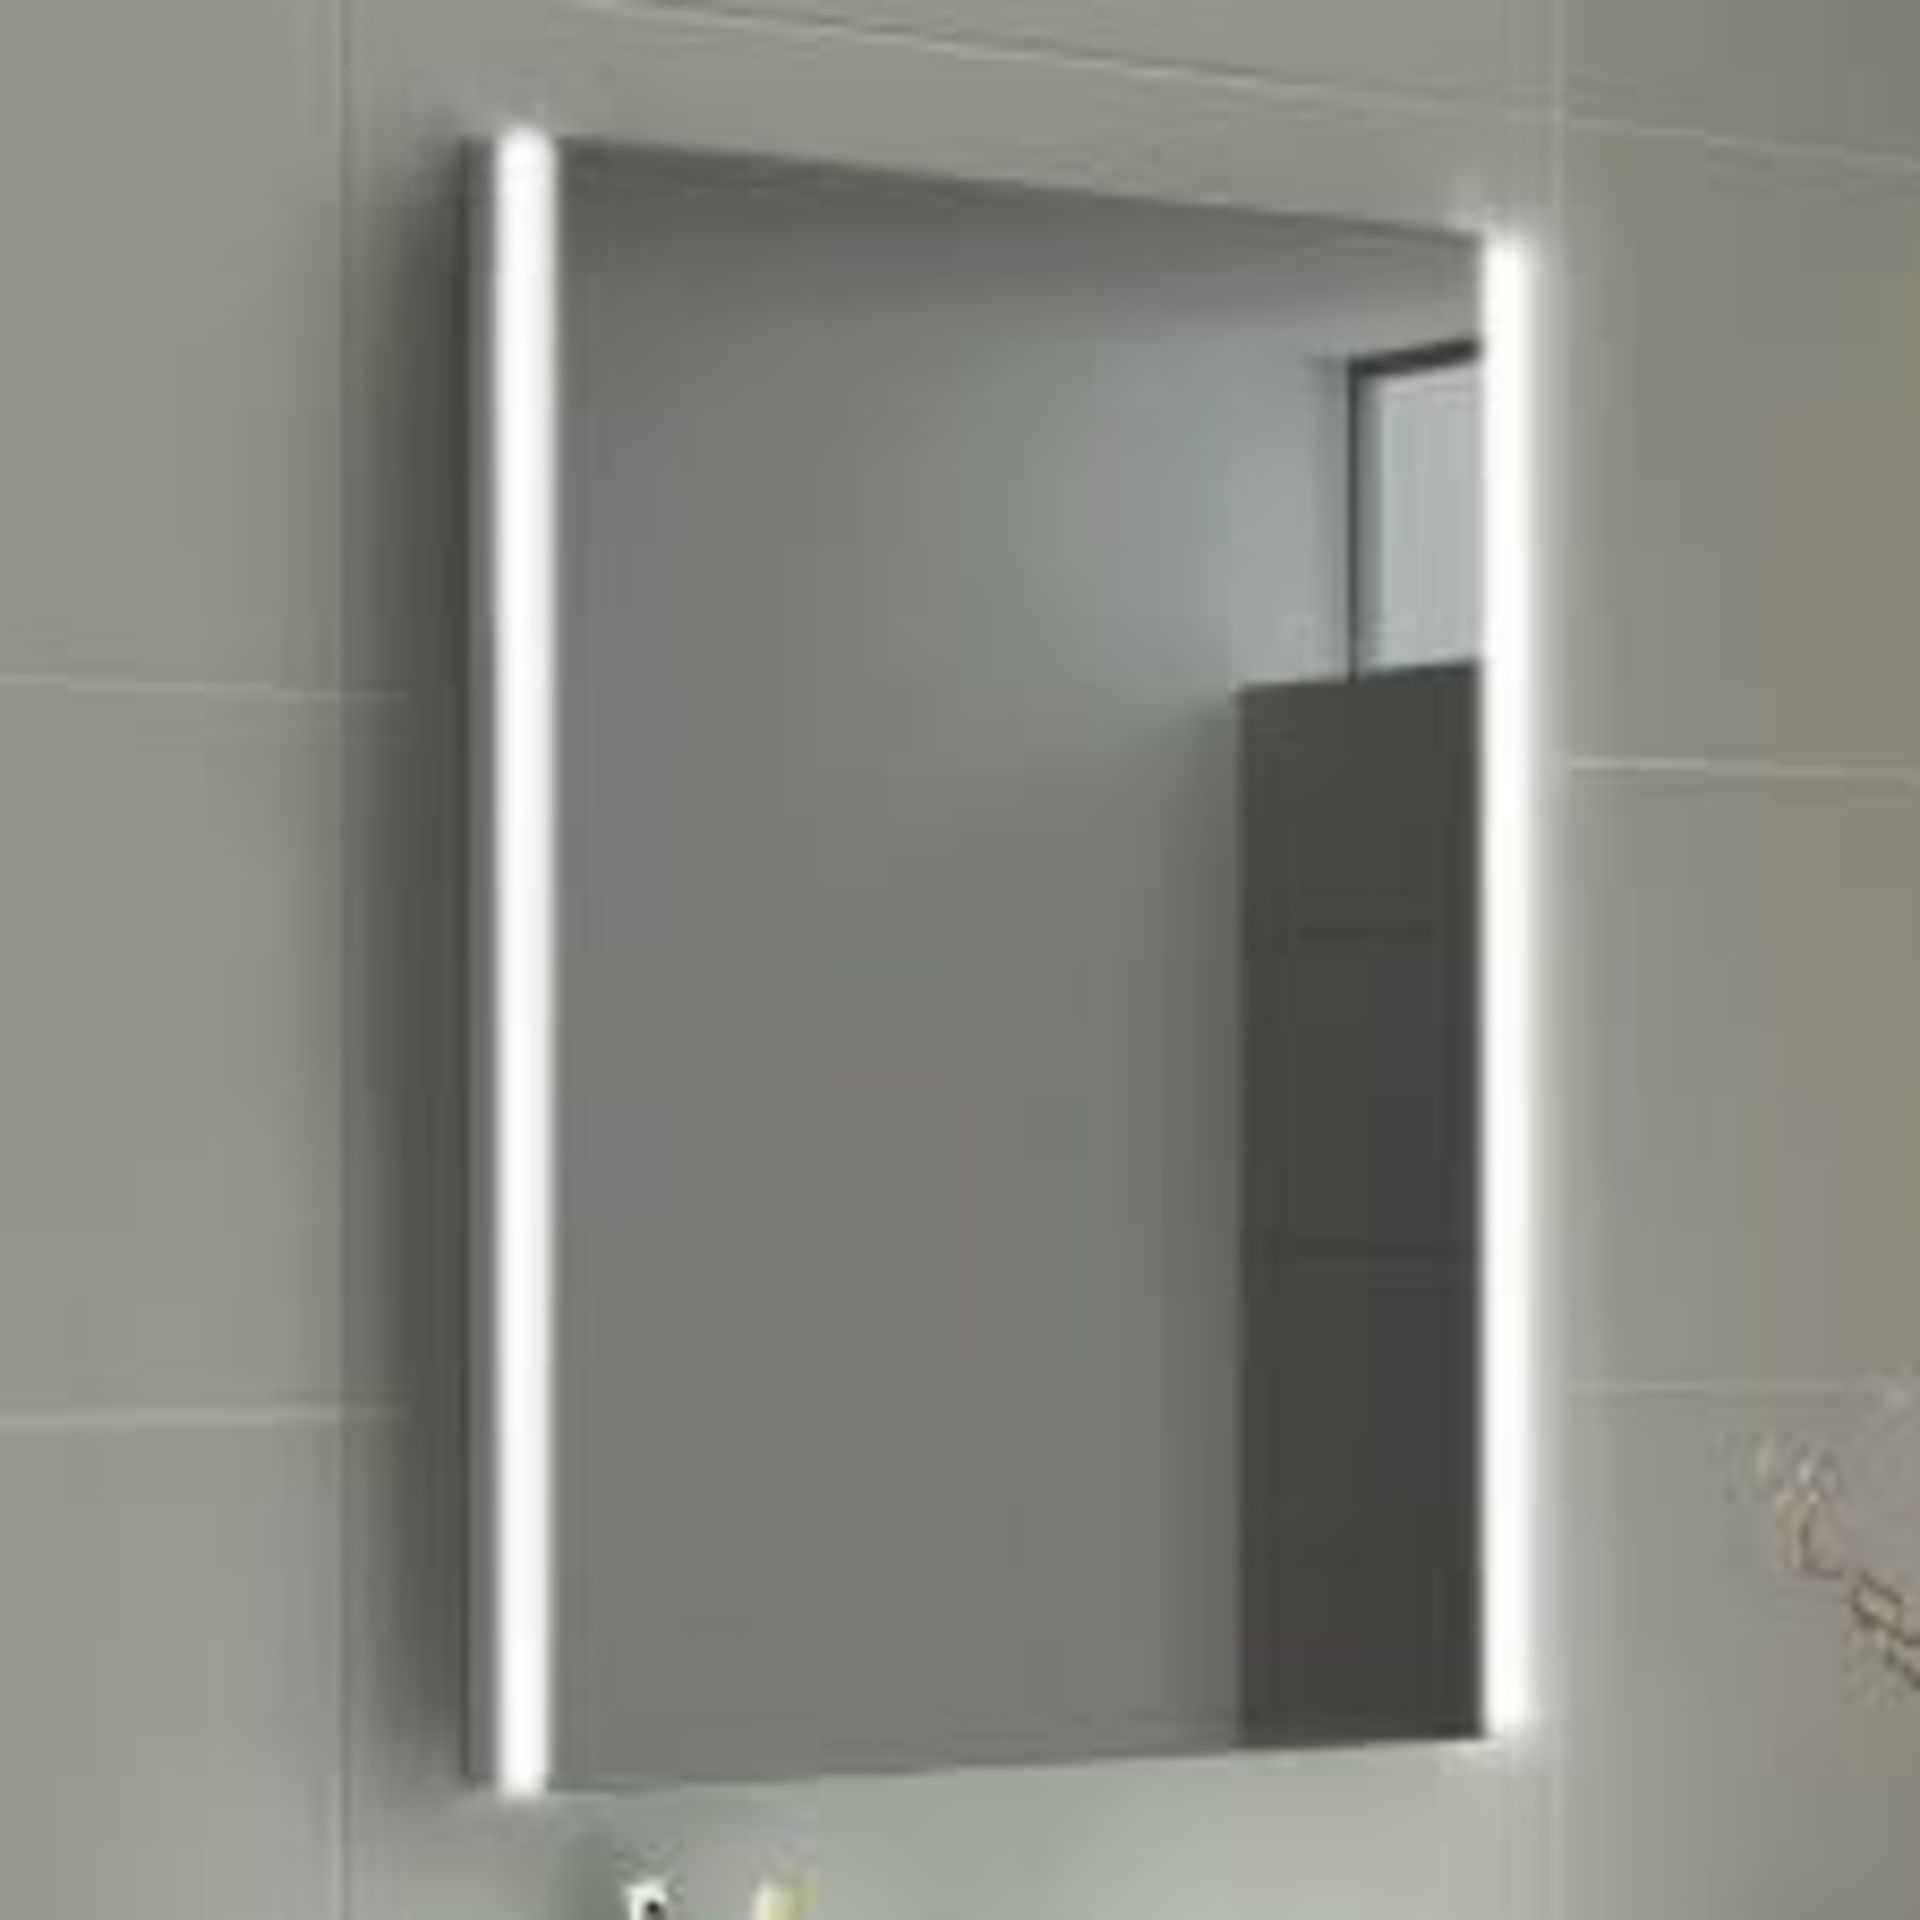 (J119) 500x700mm Lunar LED Mirror - Battery Operated. RRP £299.99. Energy saving controlled On / Off